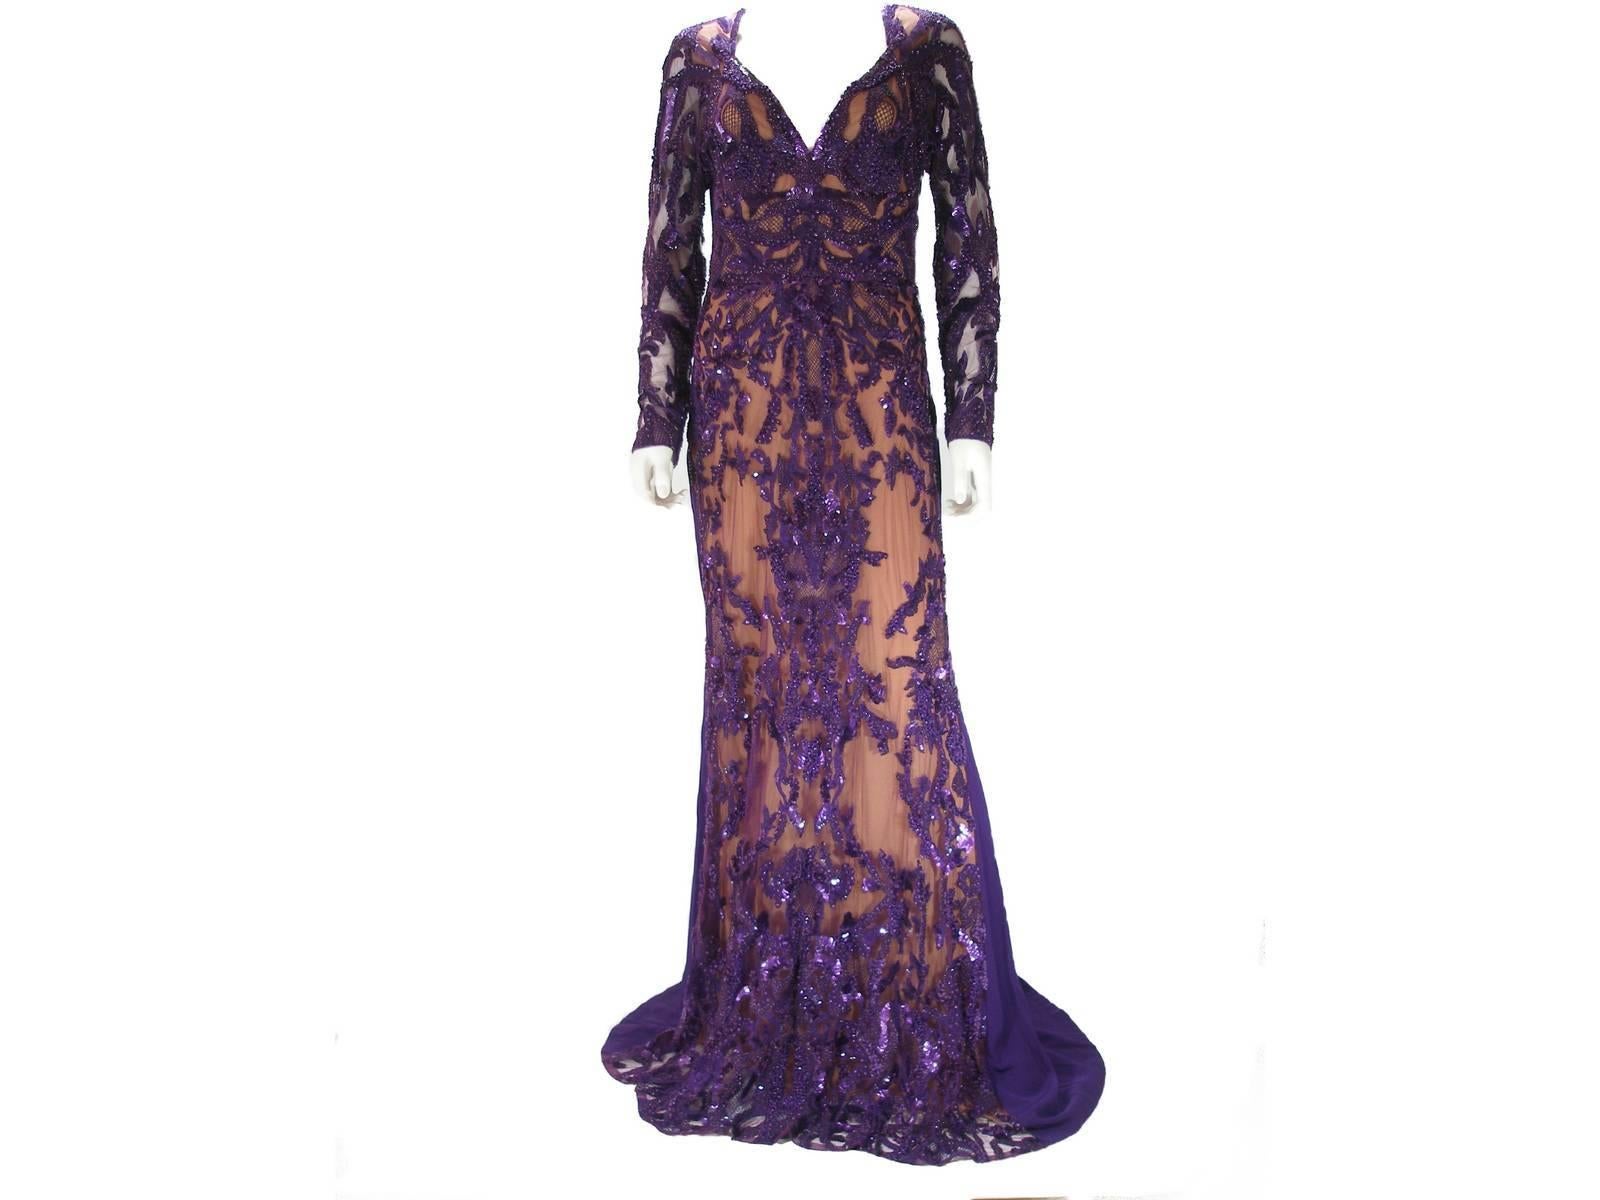 FAN-TAS-TIC and Rare on second hand 
Elie SAAB Haute Couture 
Retail price approx 14000 $
This garment has been professionally cleaned, is odor free. Thoroughly checked over before shipping, it will be ready to wear upon arrival. 
PLEASE NOTE : this